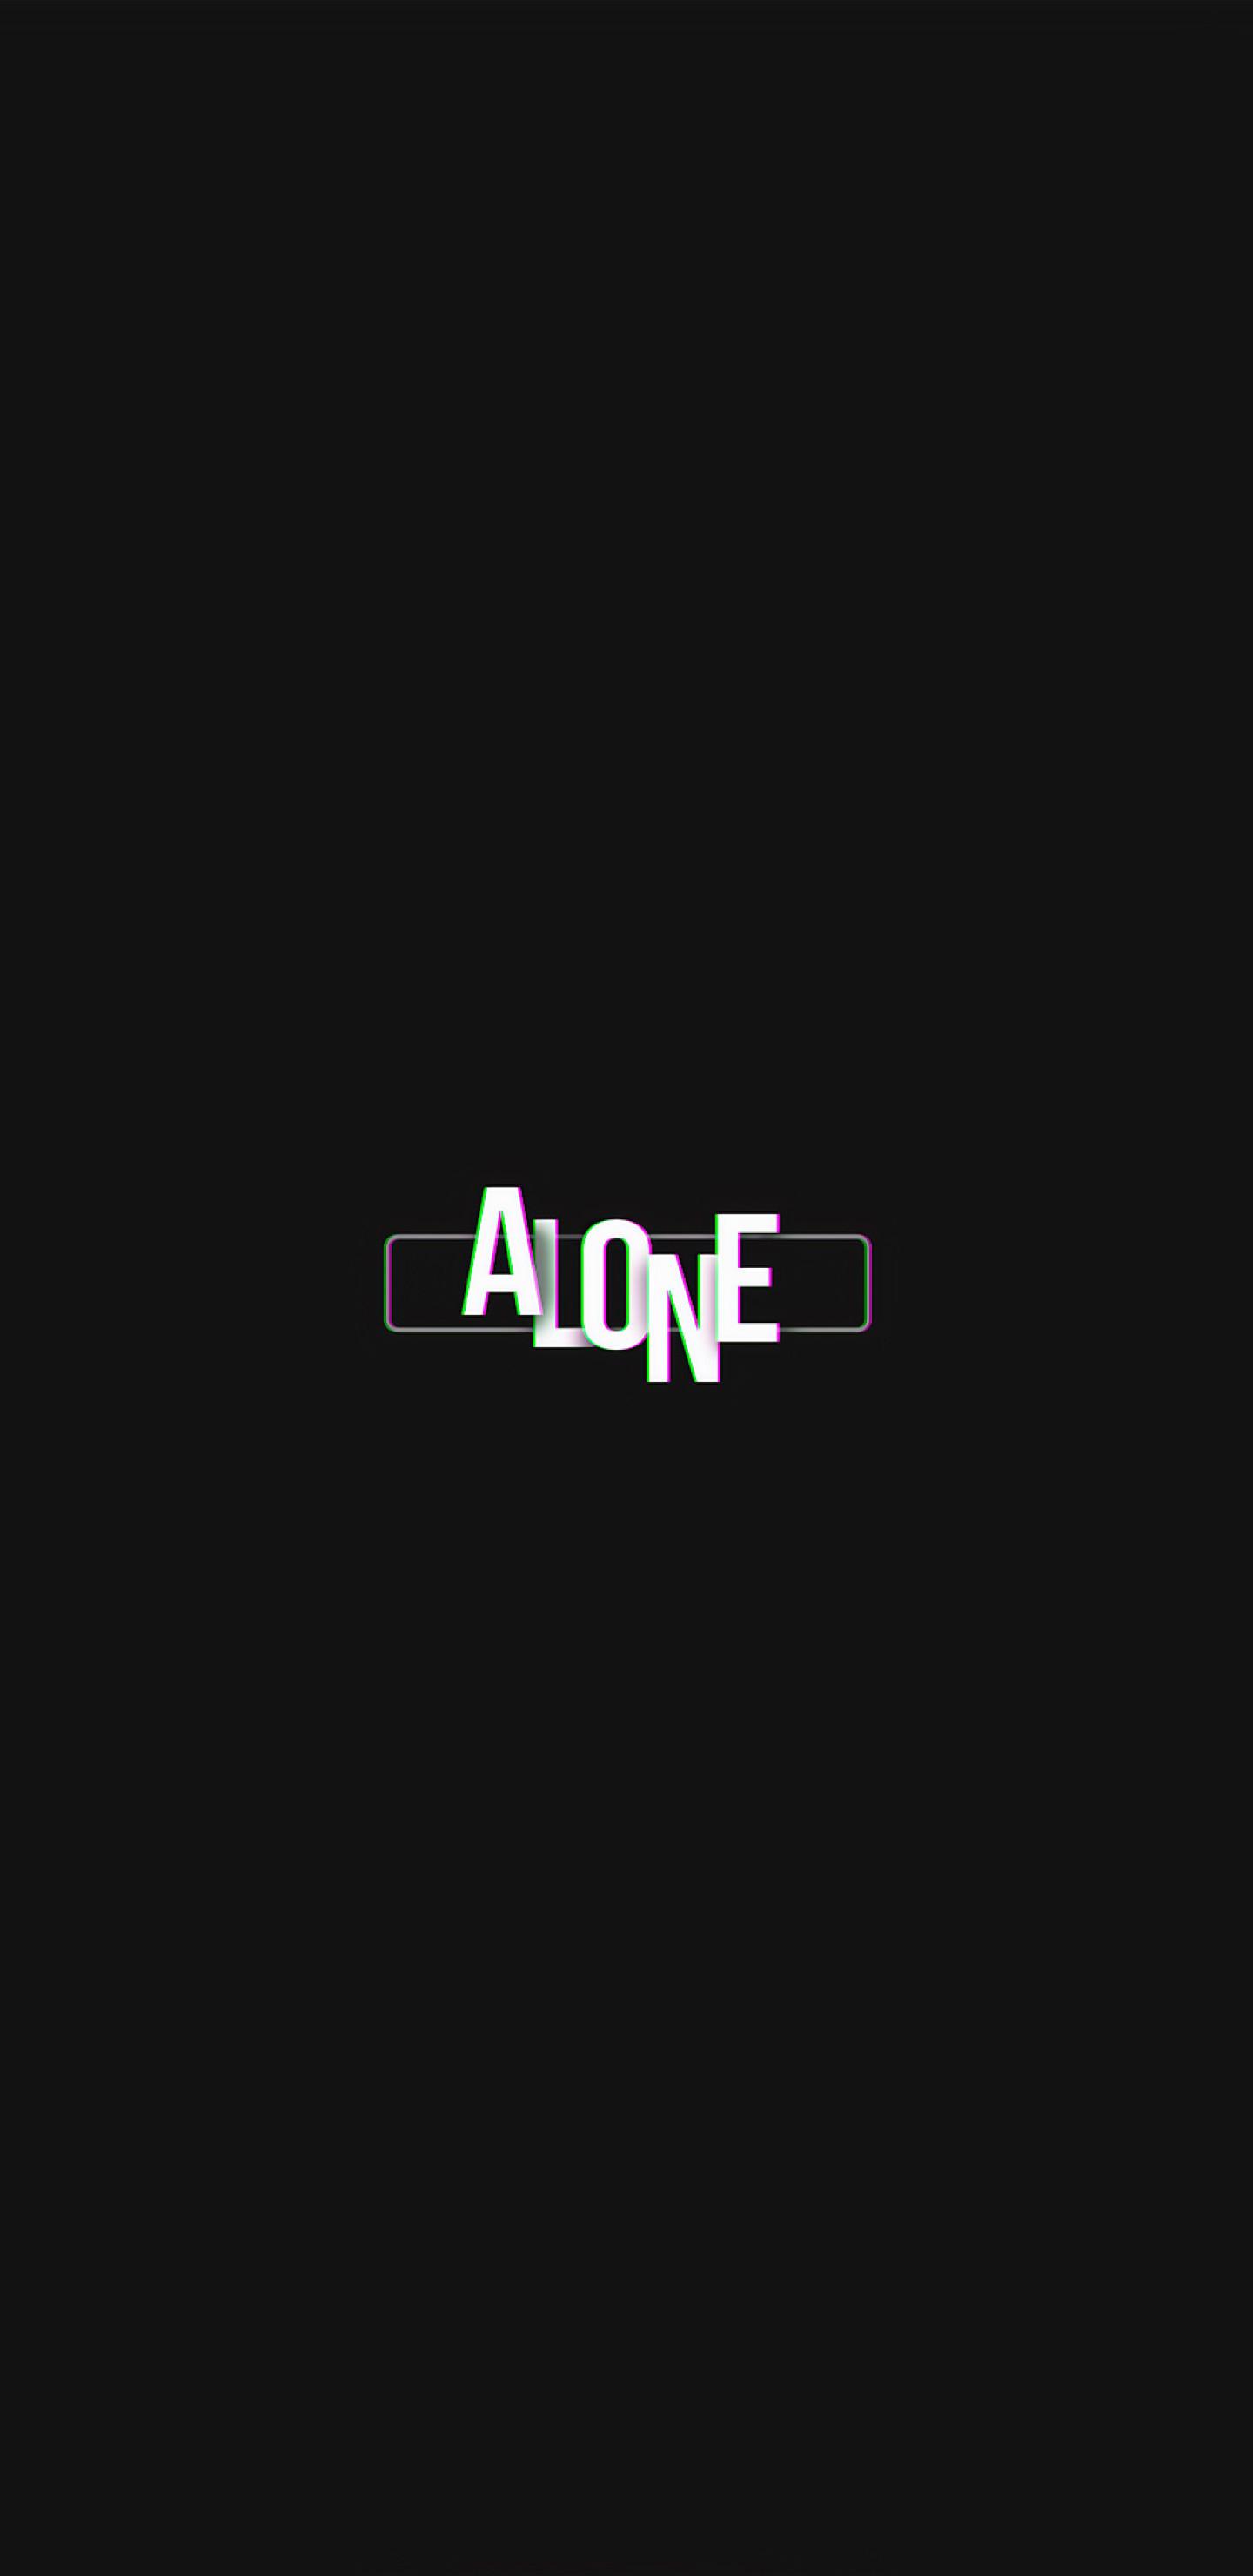 Alone Simple Typography 4k Samsung Galaxy Note 8